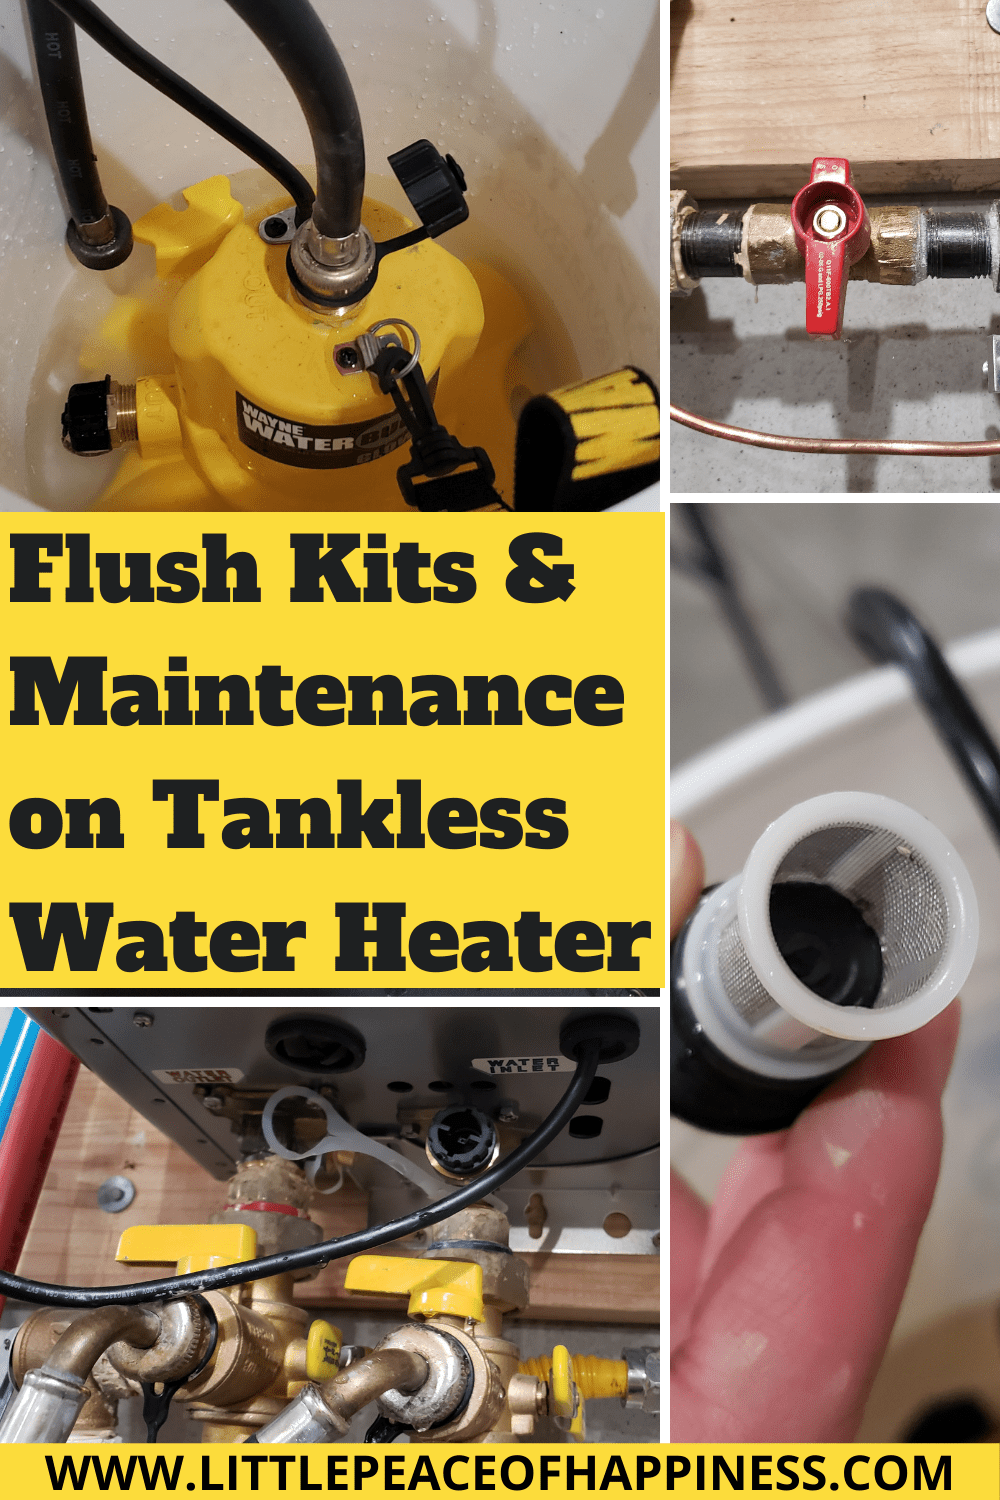 Flush Kits and Maintenance on Tankless Water Heater